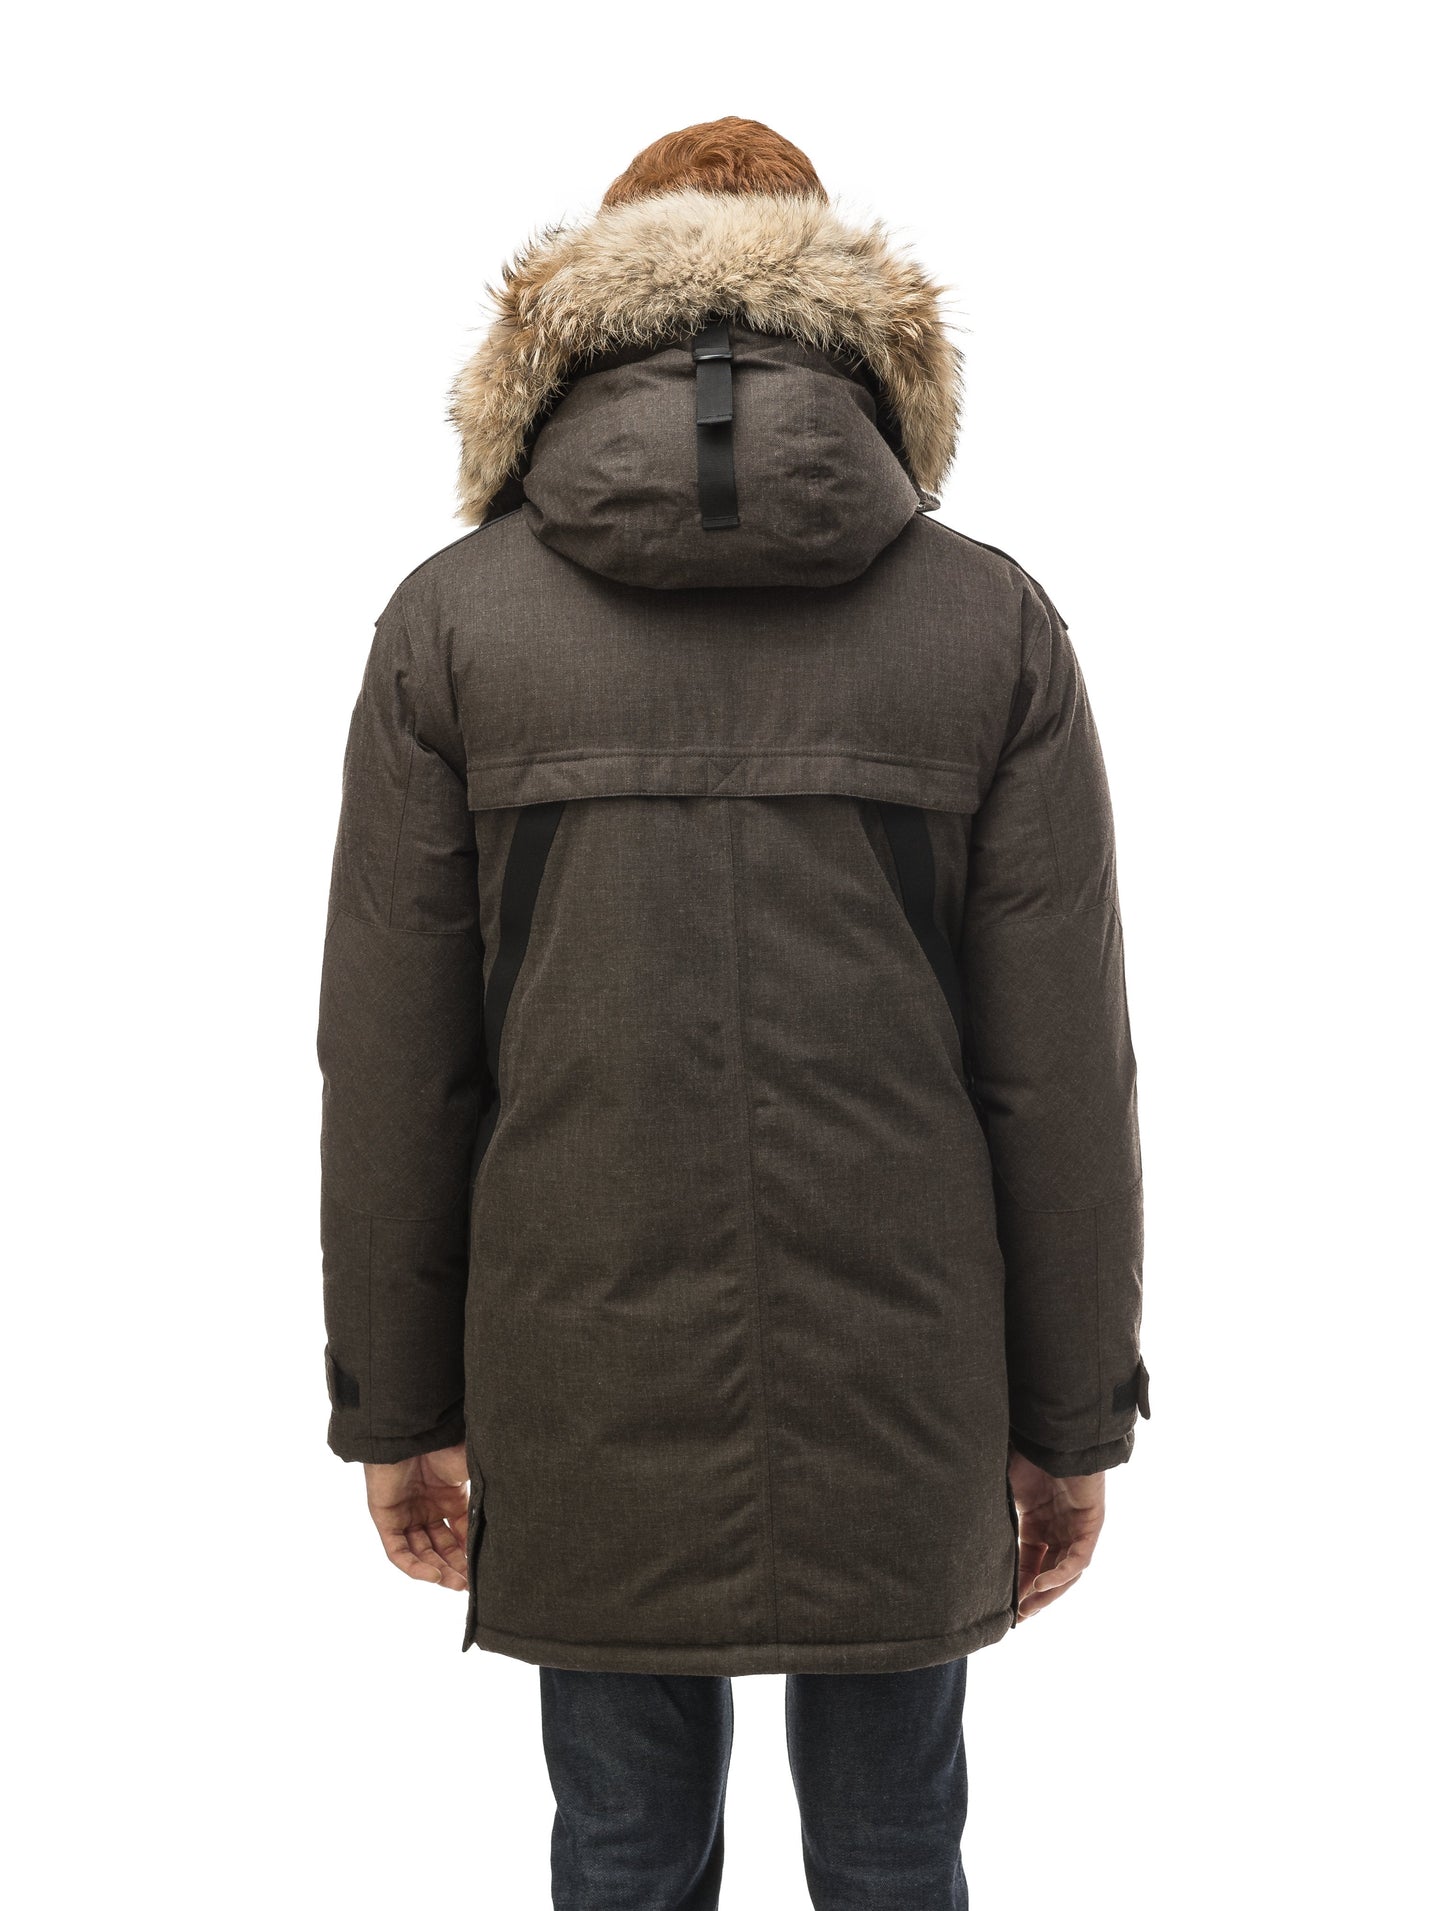 Men's Best Selling Parka the Yatesy is a down filled jacket with a zipper closure and magnetic placket in H. Brown